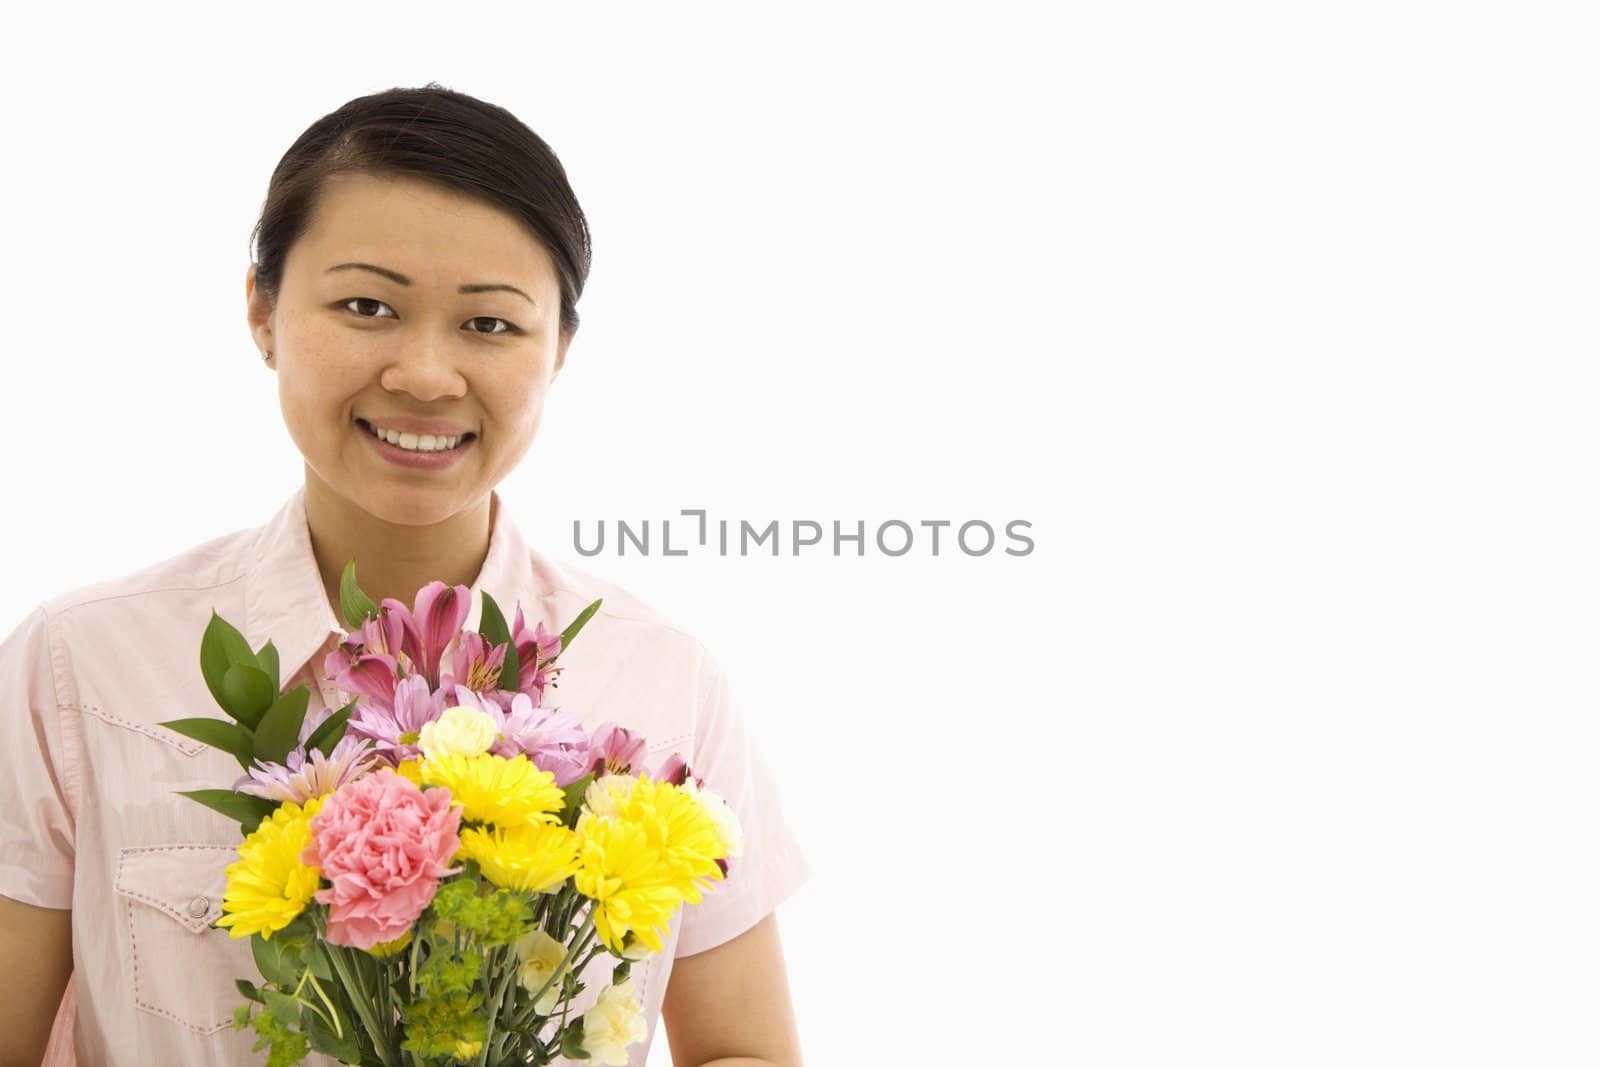 Mid adult Asian woman holding bouquet of flowers.